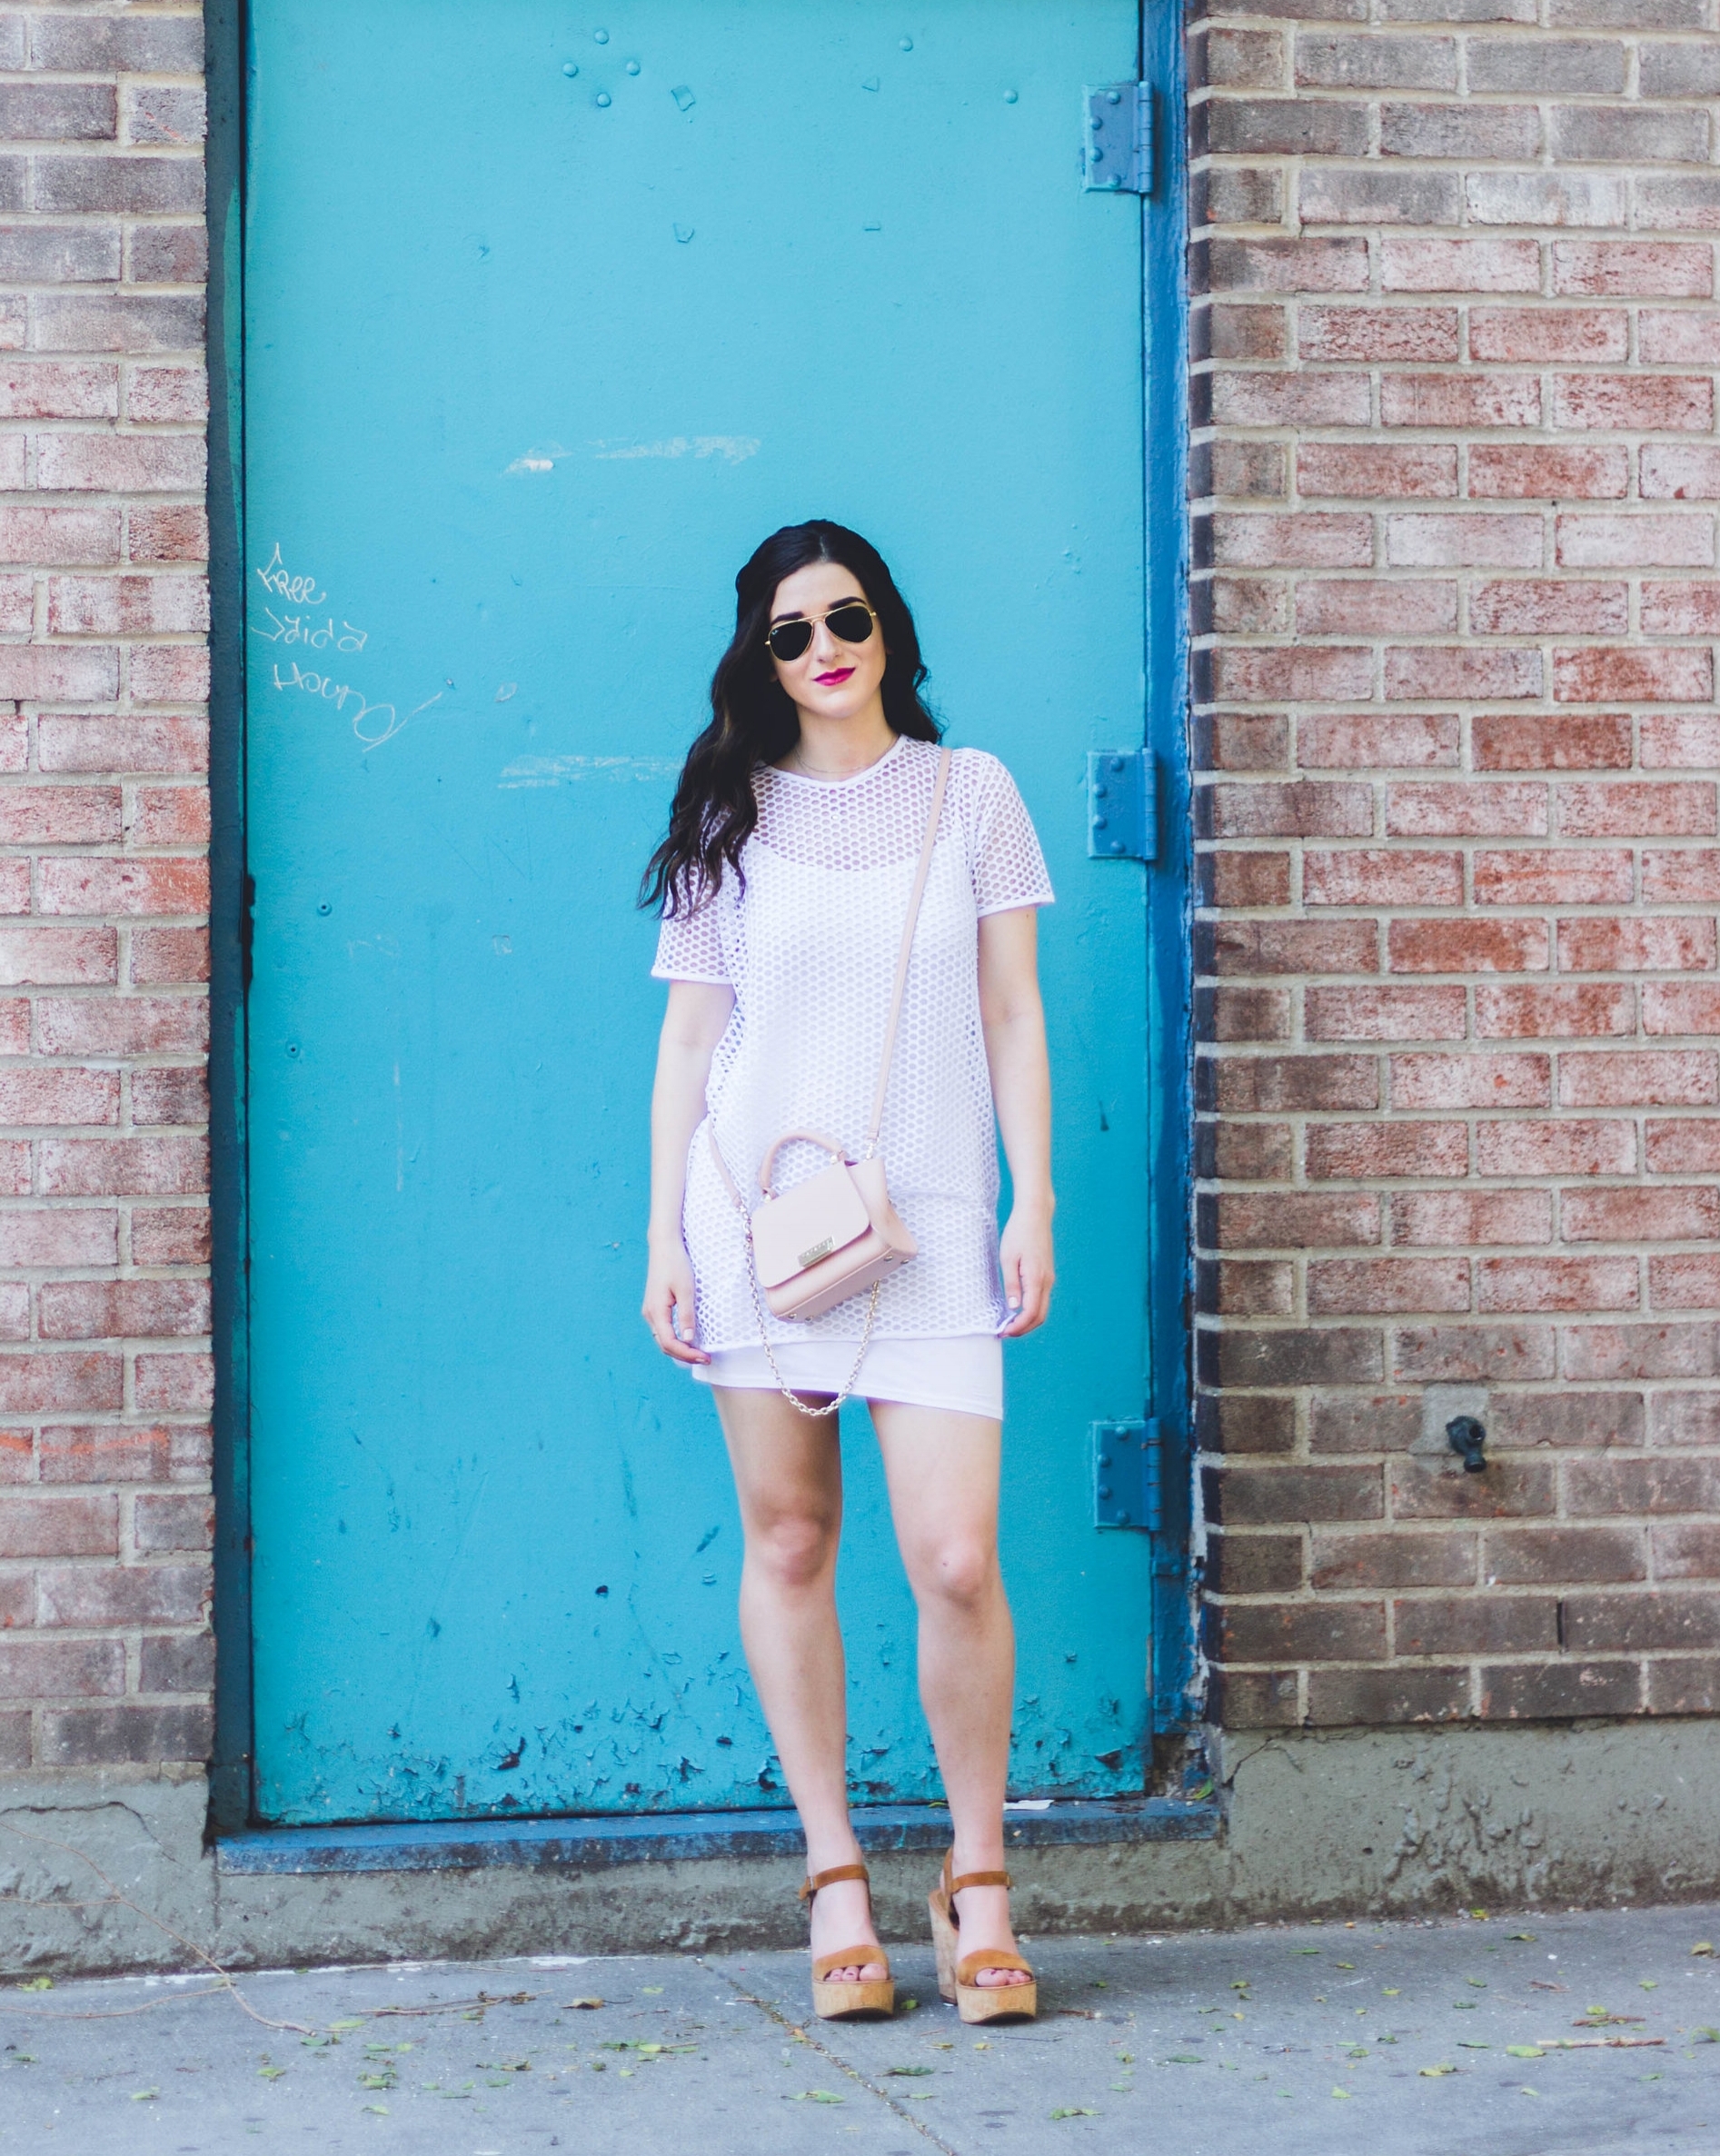 White Mesh Dress Love My Fiance Hate Being Engaged Esther Santer Fashion Blog NYC Street Style Blogger Outfit OOTD Trendy Summer Cork Wedges ASOS Dolce Vita Aviators Sunglasses RayBan Girl Women Look Inspiration Hair Beauty  Model Photoshoot New York.jpg